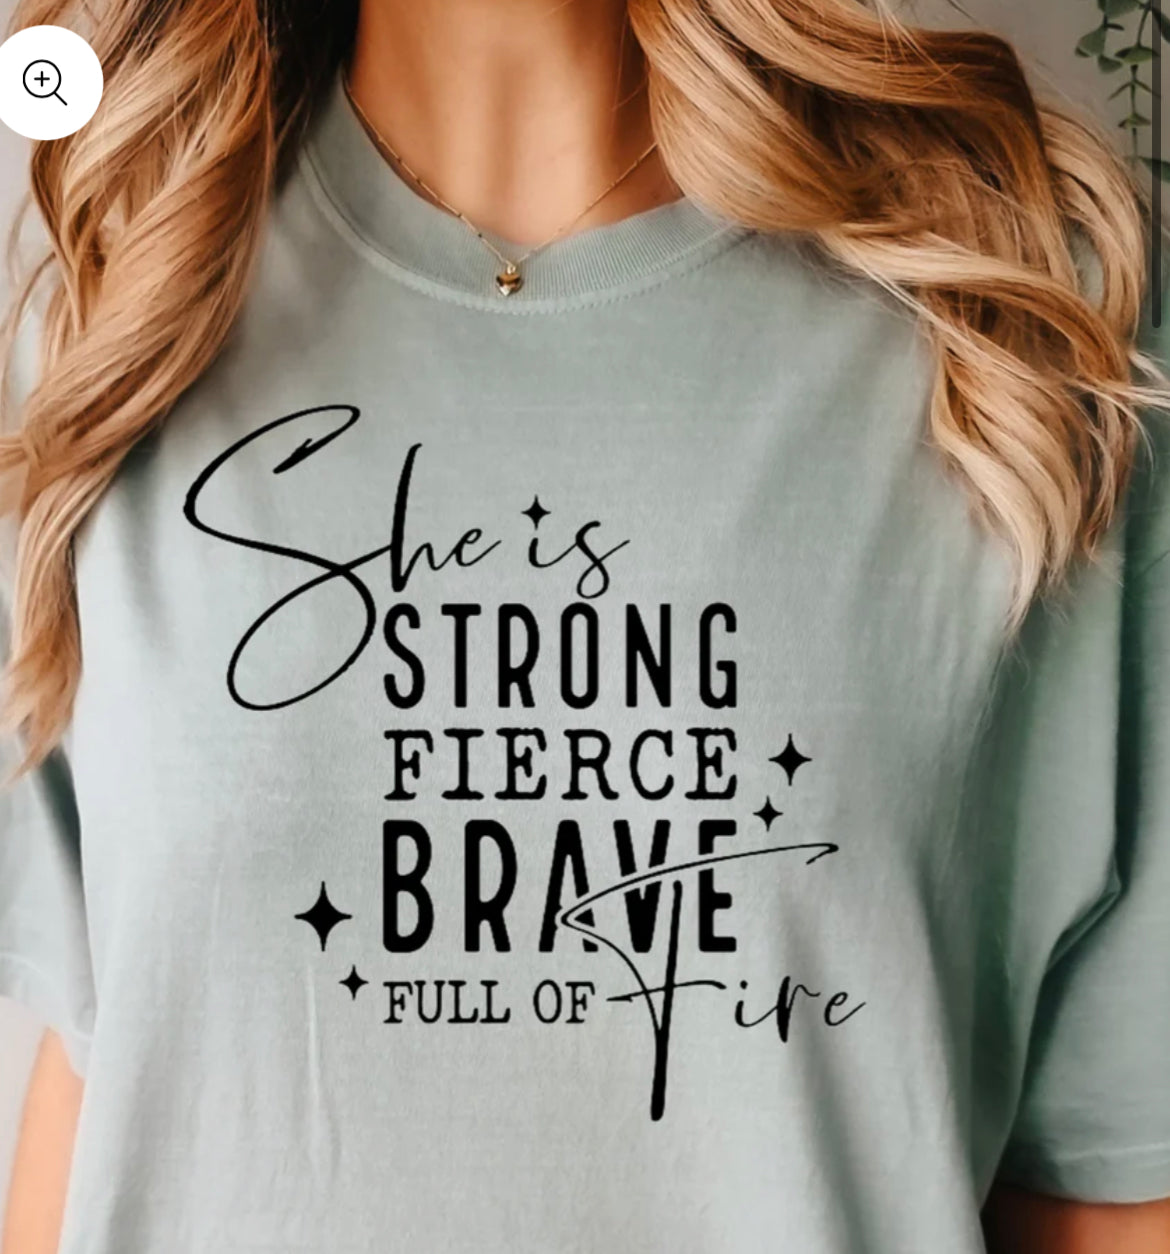 She Is Strong, Fierce, Brave